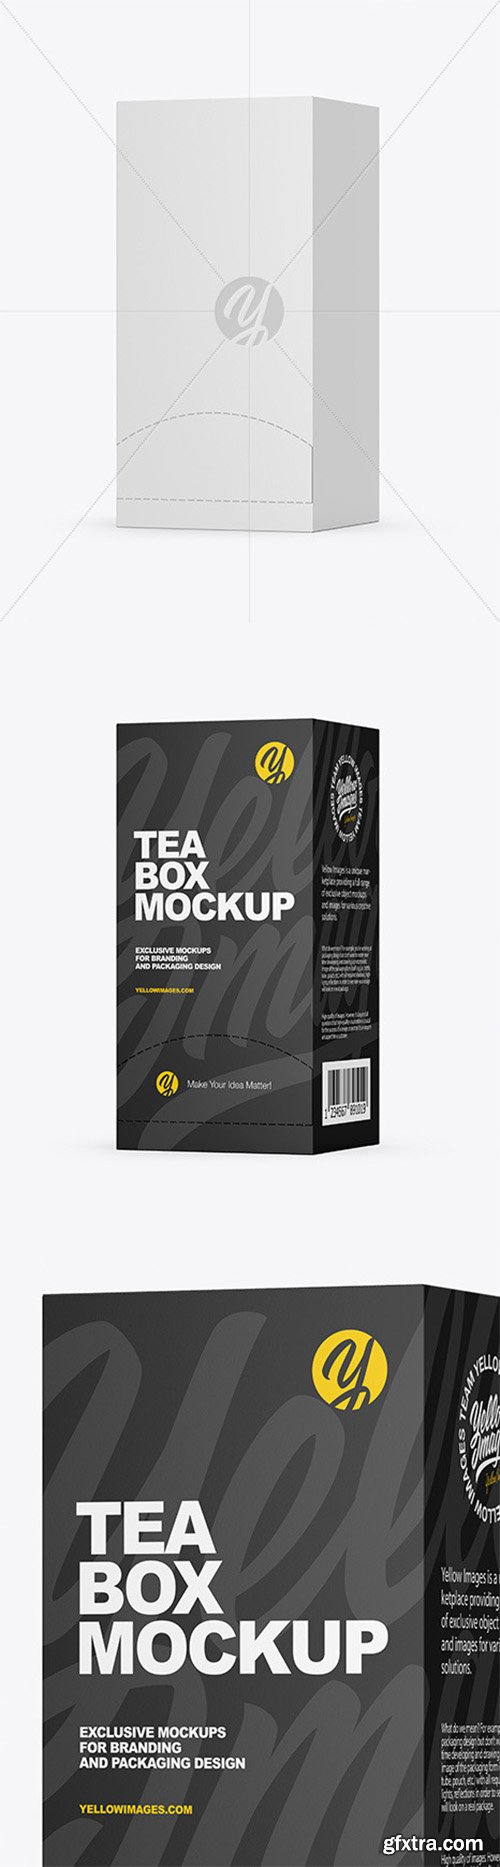 Download Box Mockup In Photoshop Download Free And Premium Psd Mockup Templates And Design Assets PSD Mockup Templates